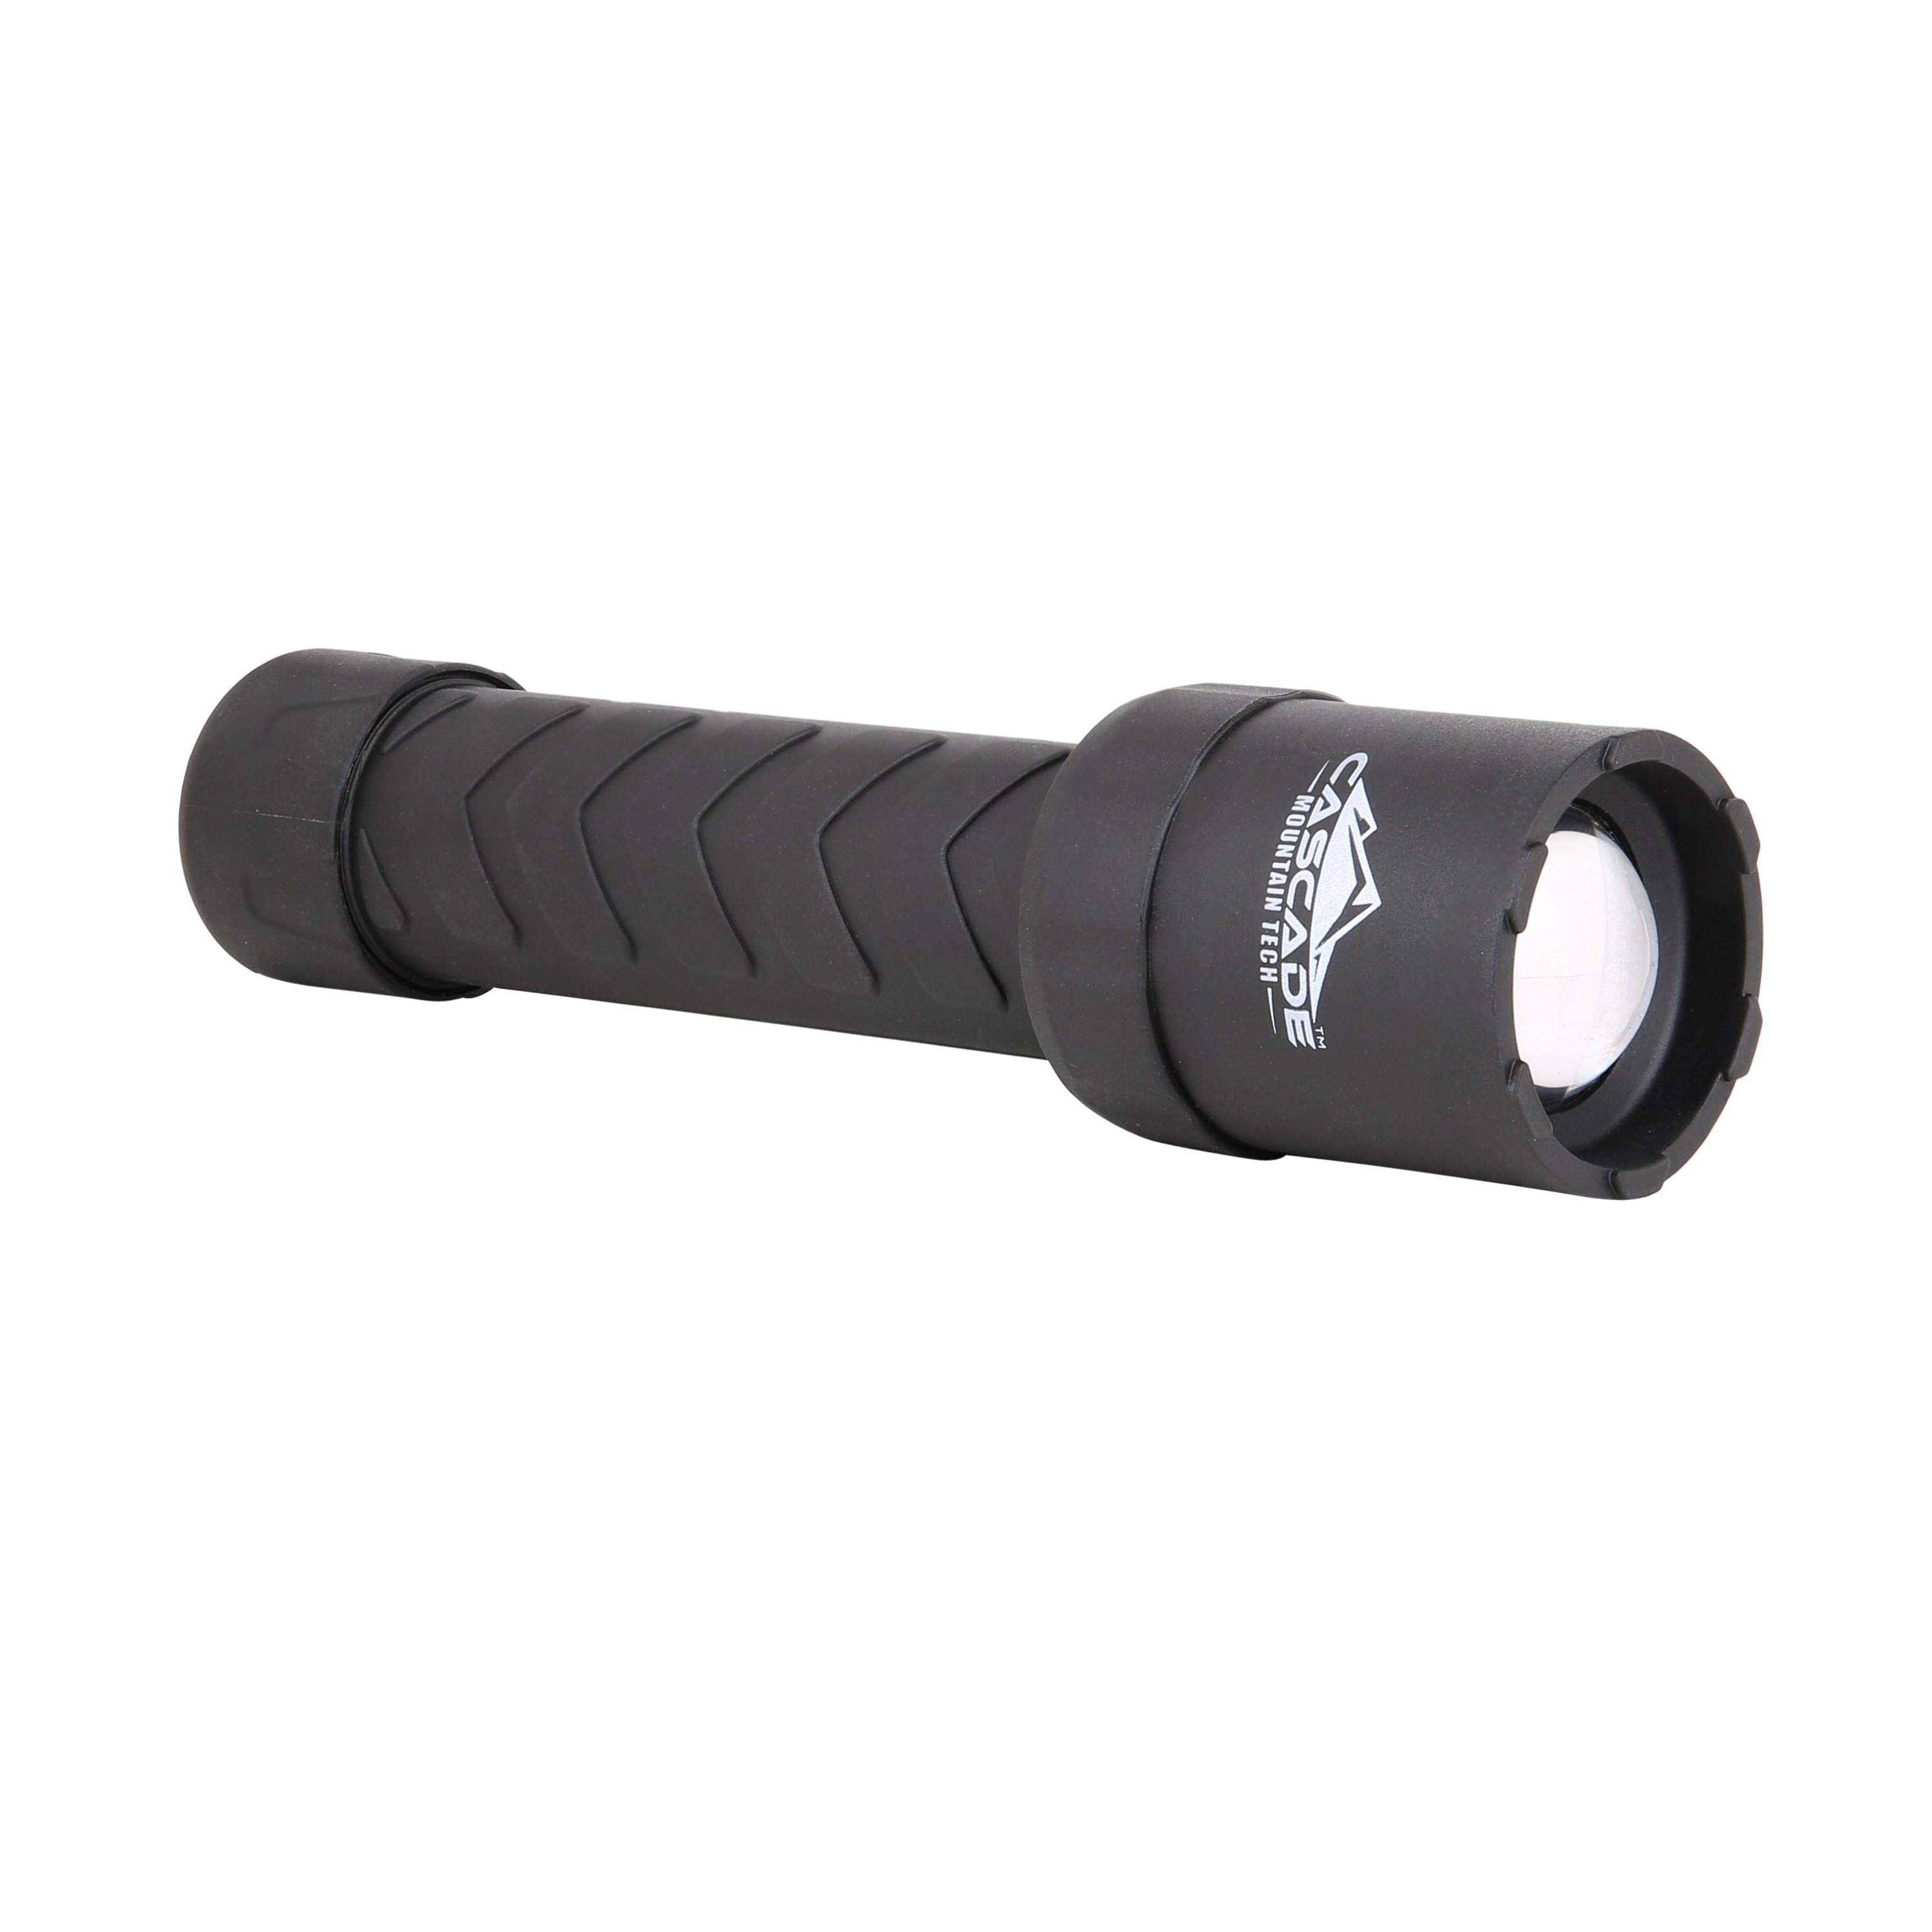 CMT STEELCORE™ 1000Lumens LED Flashlight Black, with Emergency Strobe Feature, 4 AA Batteries Included - image 1 of 7